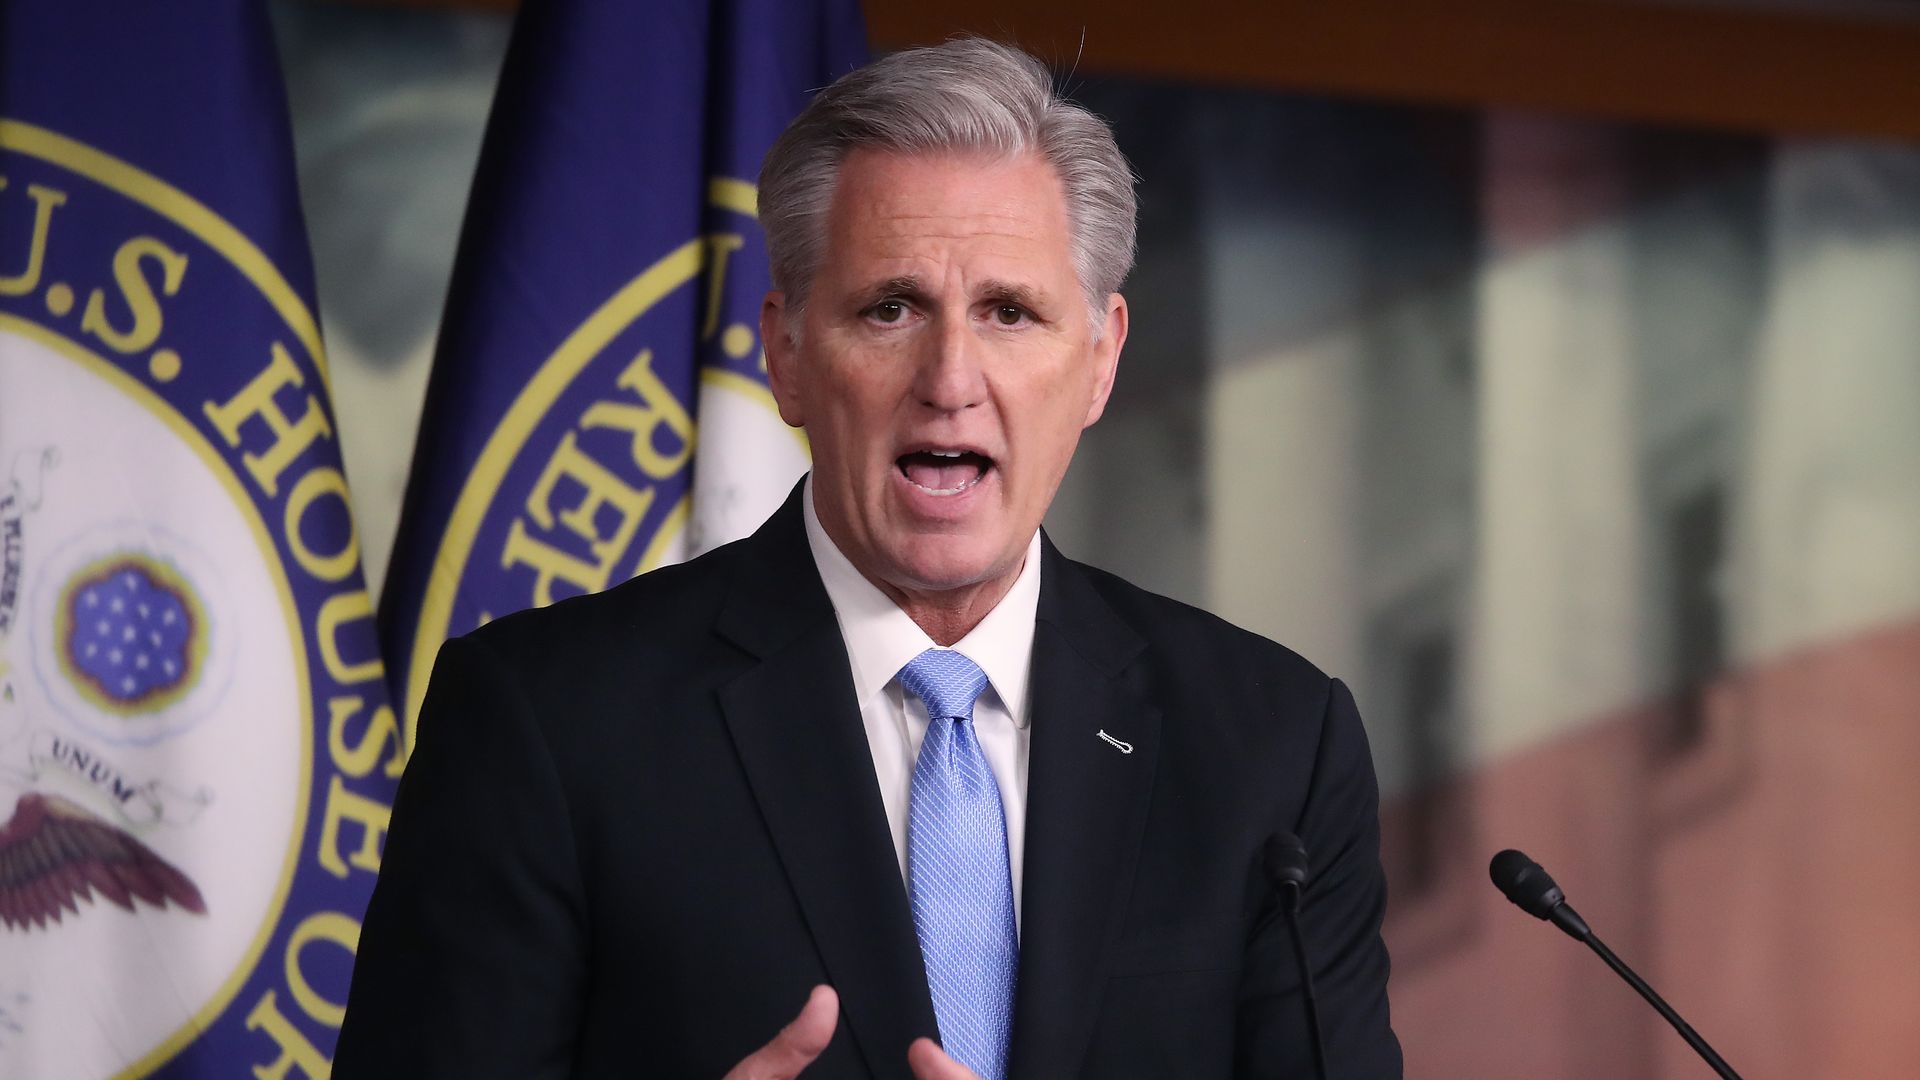 ouse Minority Leader Kevin McCarthy (R-CA) speaks during his weekly news conference at the U.S. Capitol on February 27, 2020 in Washington, DC.